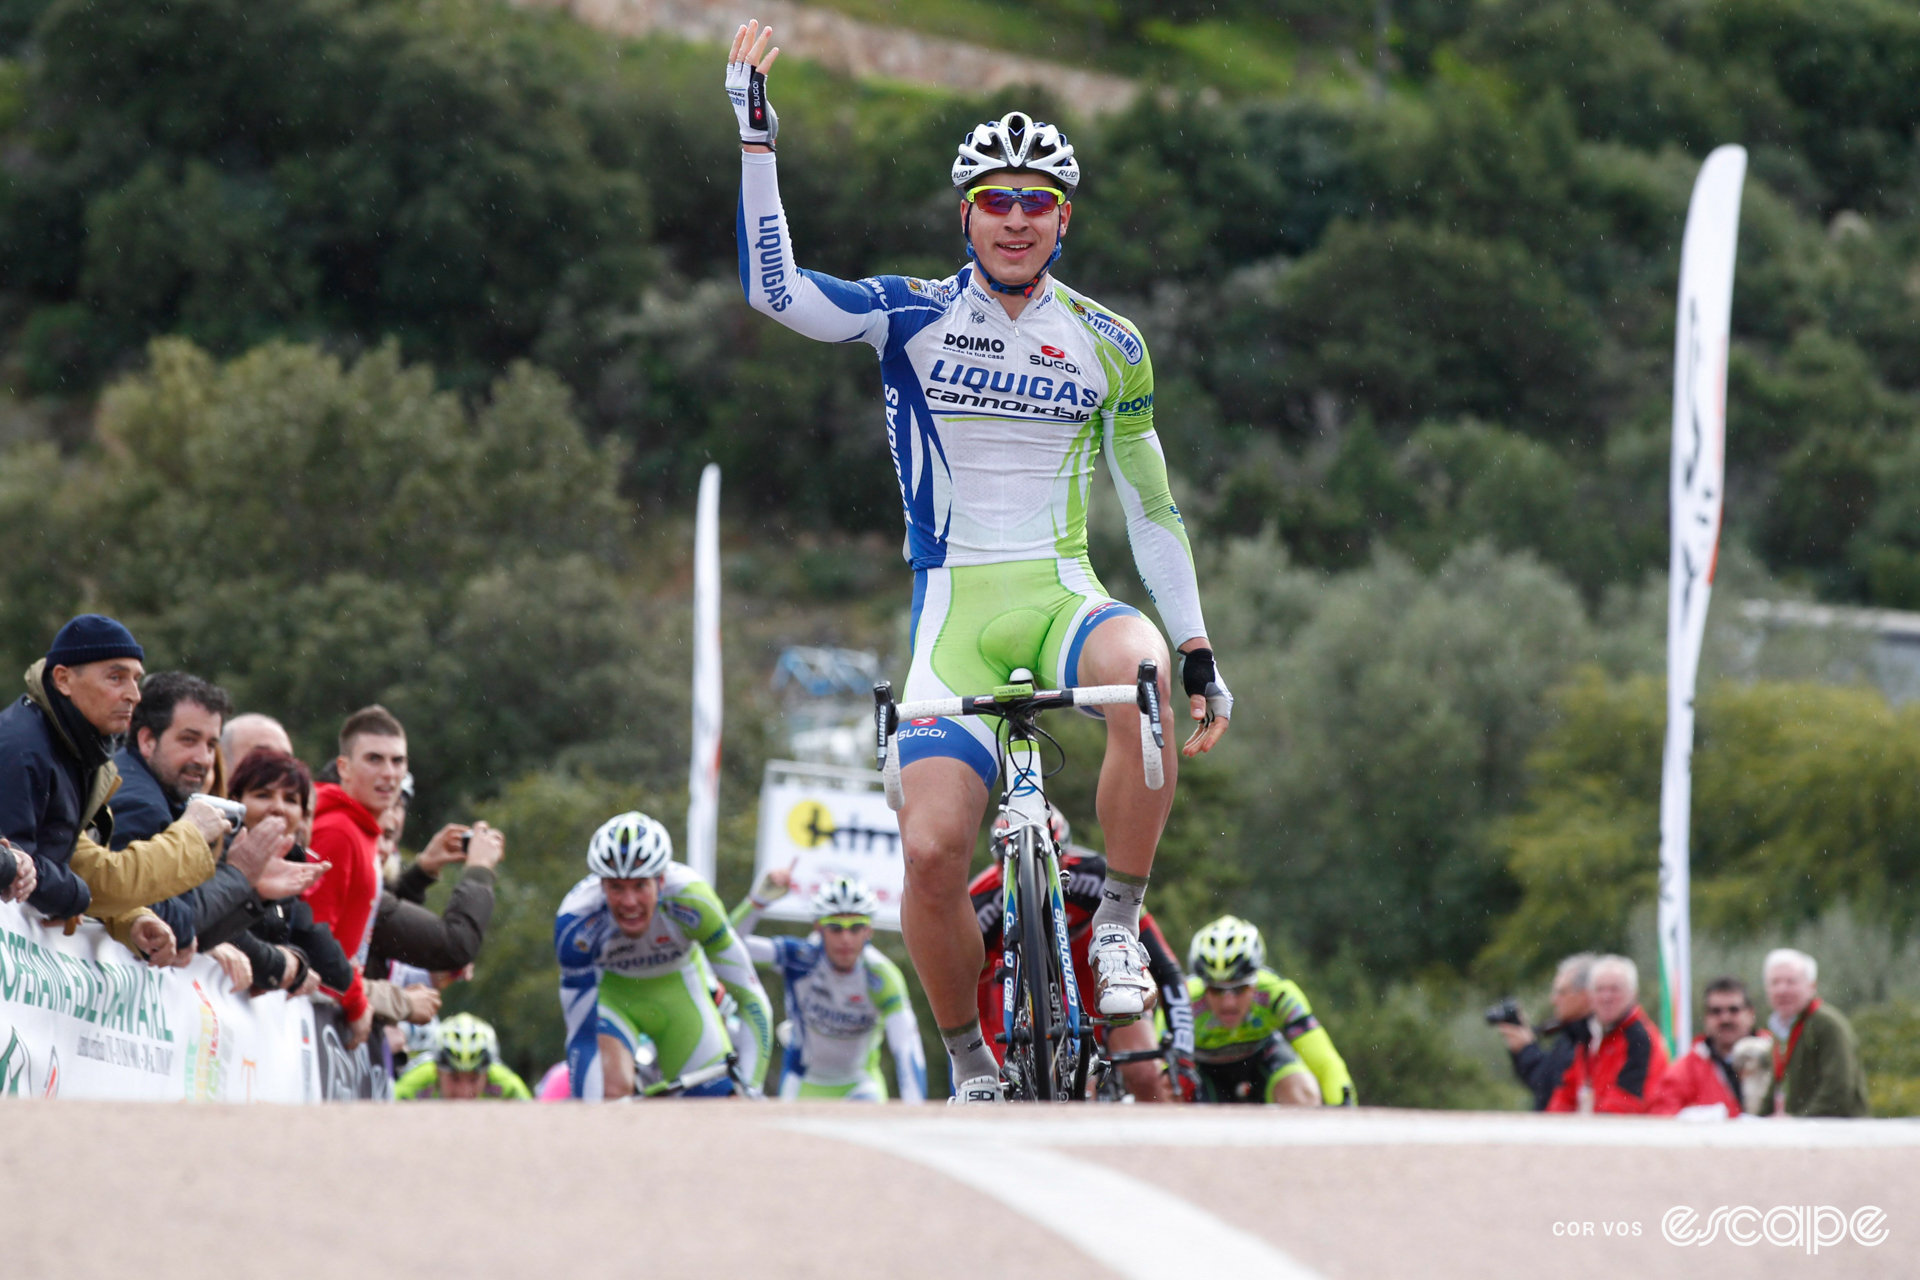 Peter Sagan celebrates winning a stage at the Giro di Sardegna, with a smile and one raised hand.